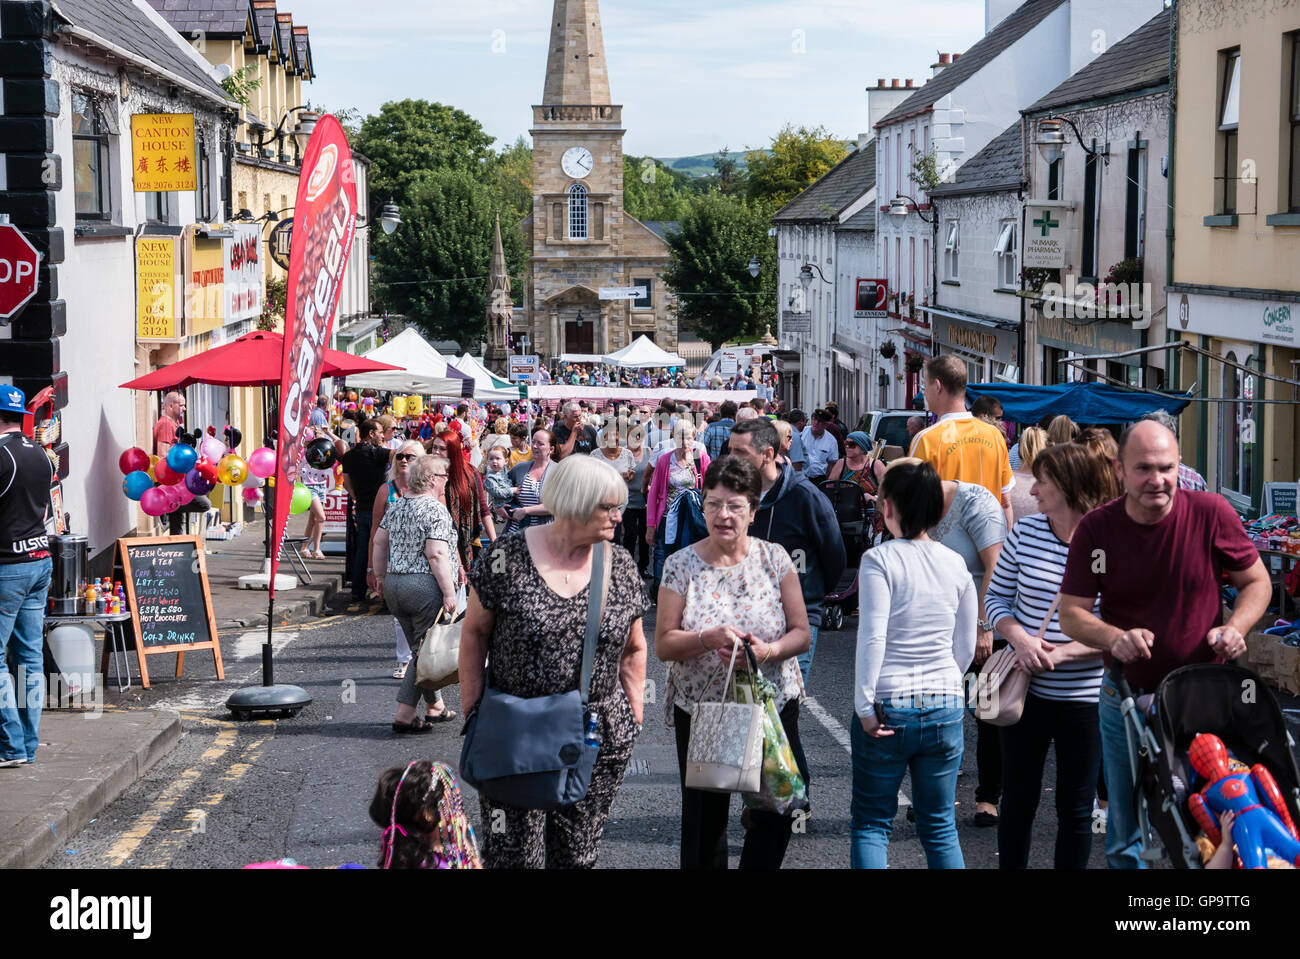 Crowds fill the streets of Ballycastle, during the annual Auld Lammas Fair, the oldest fair in the world. Stock Photo